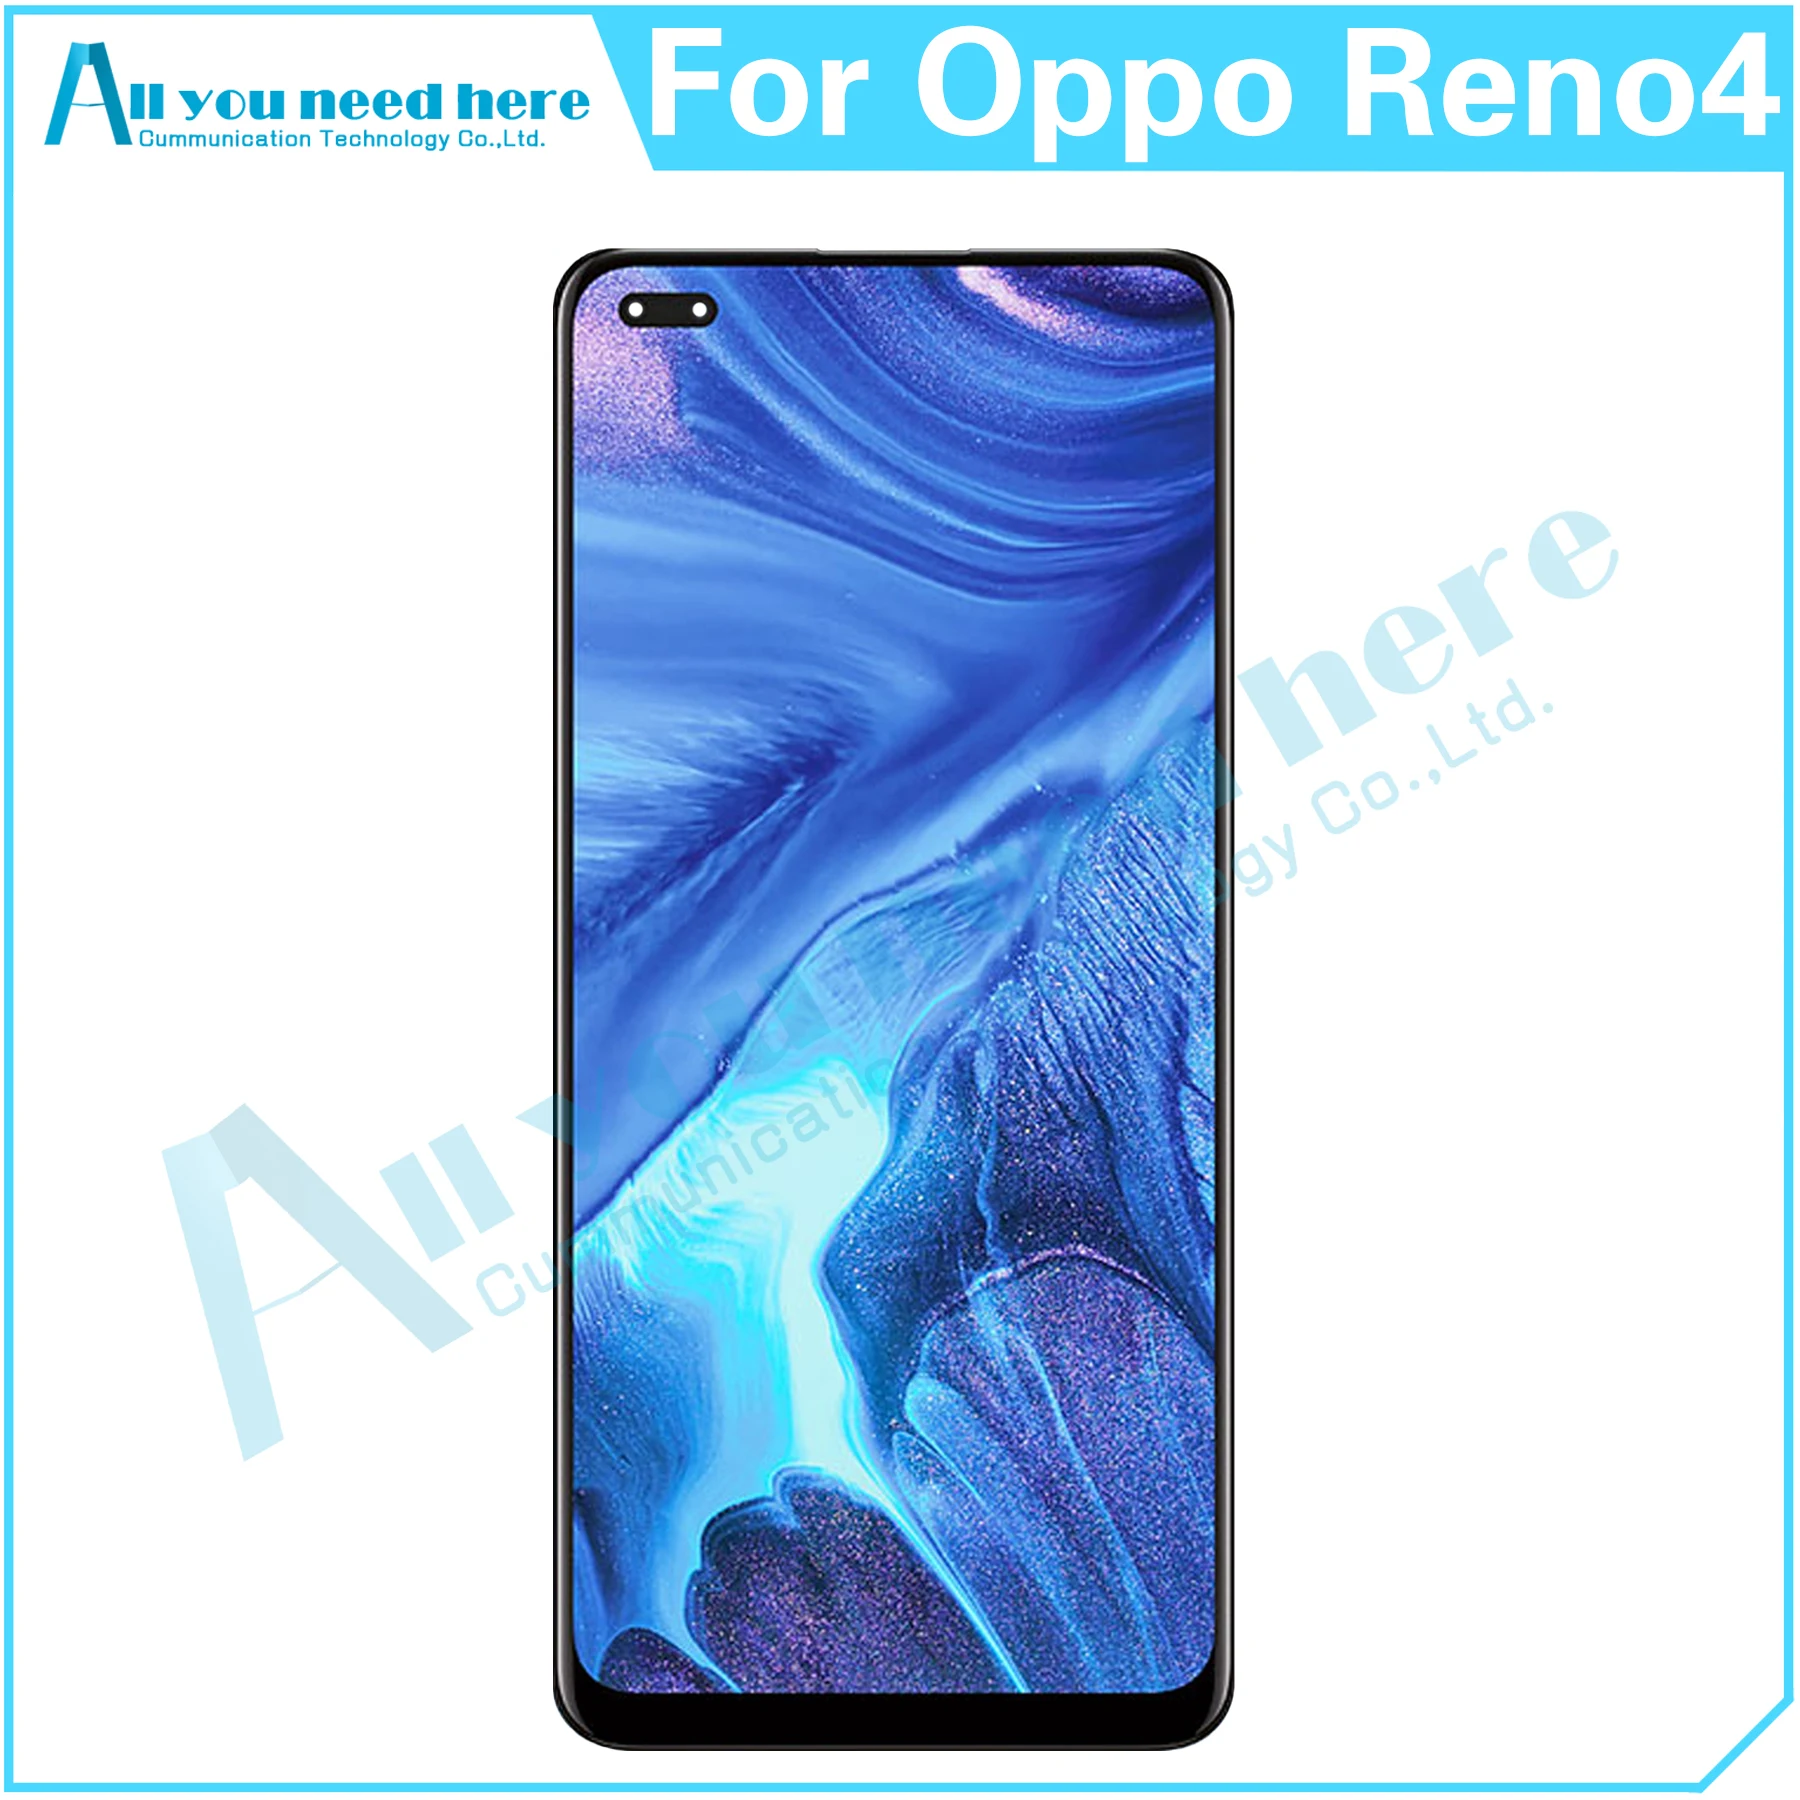 For Oppo Reno4 LCD Display Touch Screen Digitizer Assembly ​​For Oppo Reno 4 CPH2113 Screen Replacement